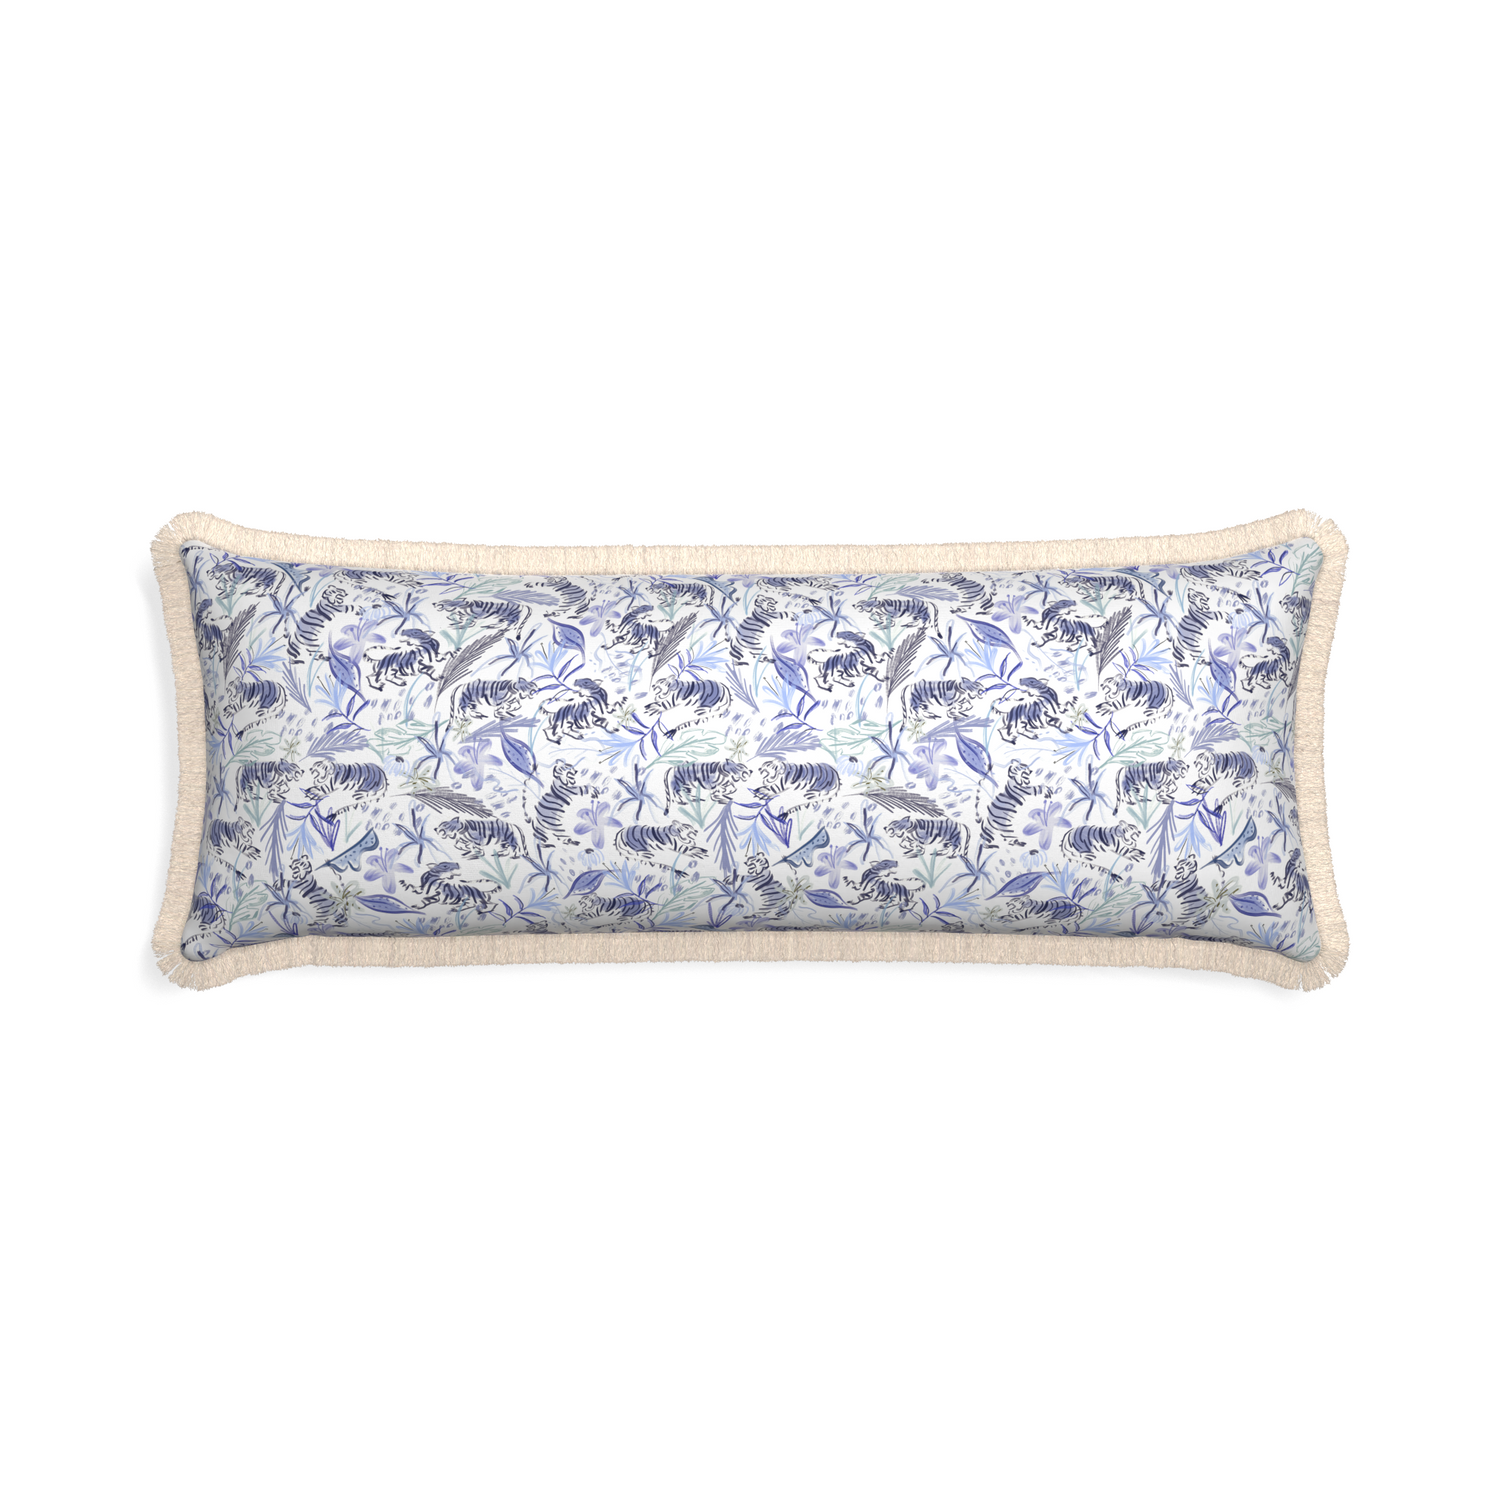 Xl-lumbar frida blue custom blue with intricate tiger designpillow with cream fringe on white background